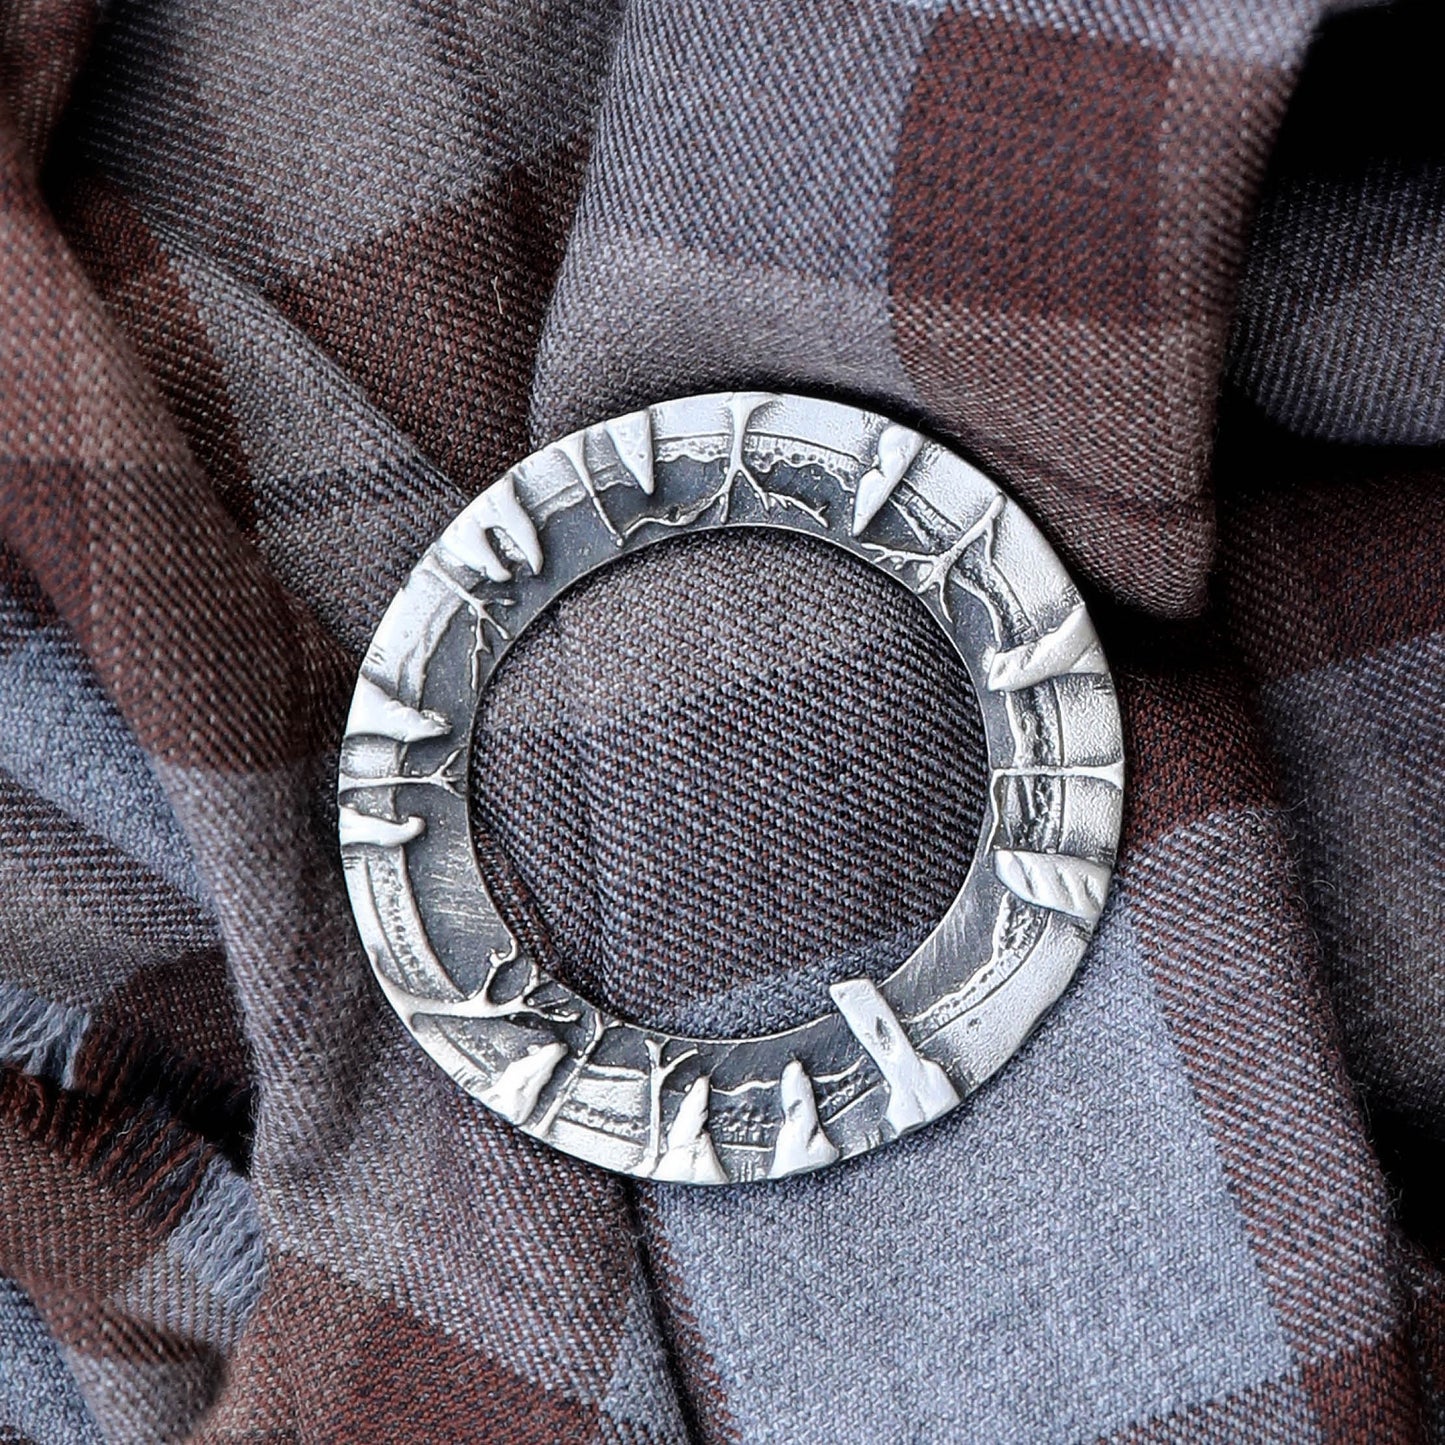 Pewter Scarf Ring Craigh na Dun stone circle featured in the Outlander TV series,  in collaboration with Sony Pictures Consumer Products., by Aurora Jewellery, Orkney, Scotland